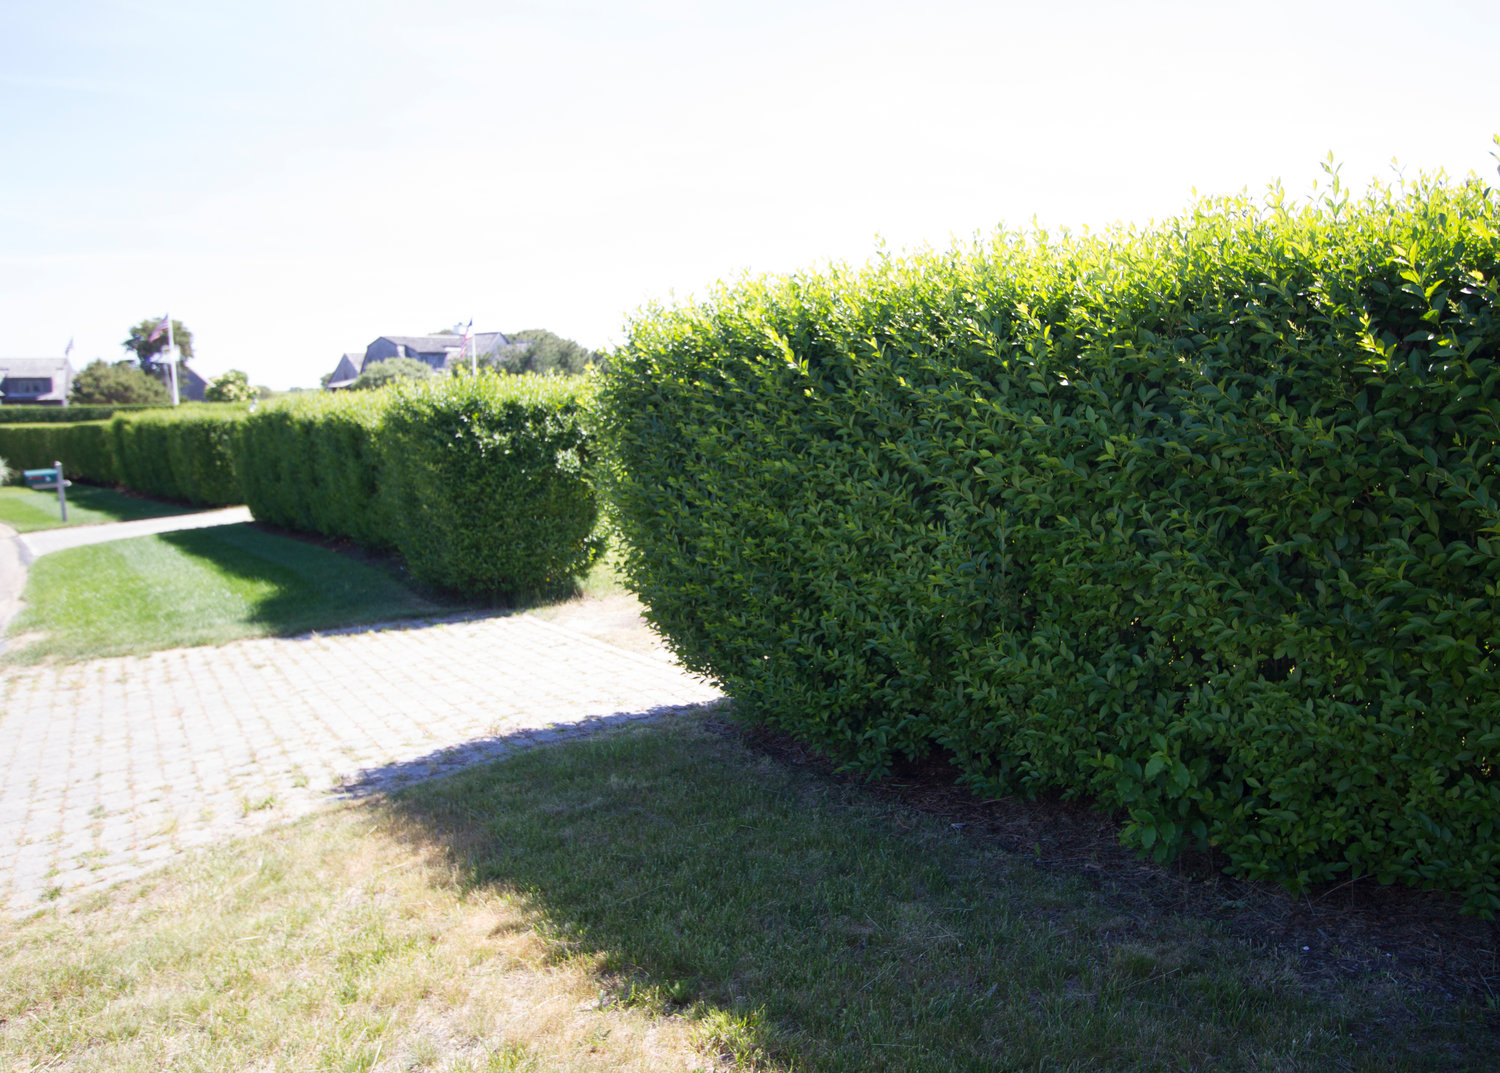 Unlike privet, above, natural, native hedges don’t need trimming, watering or feeding. They reduce wind velocity and provide privacy.